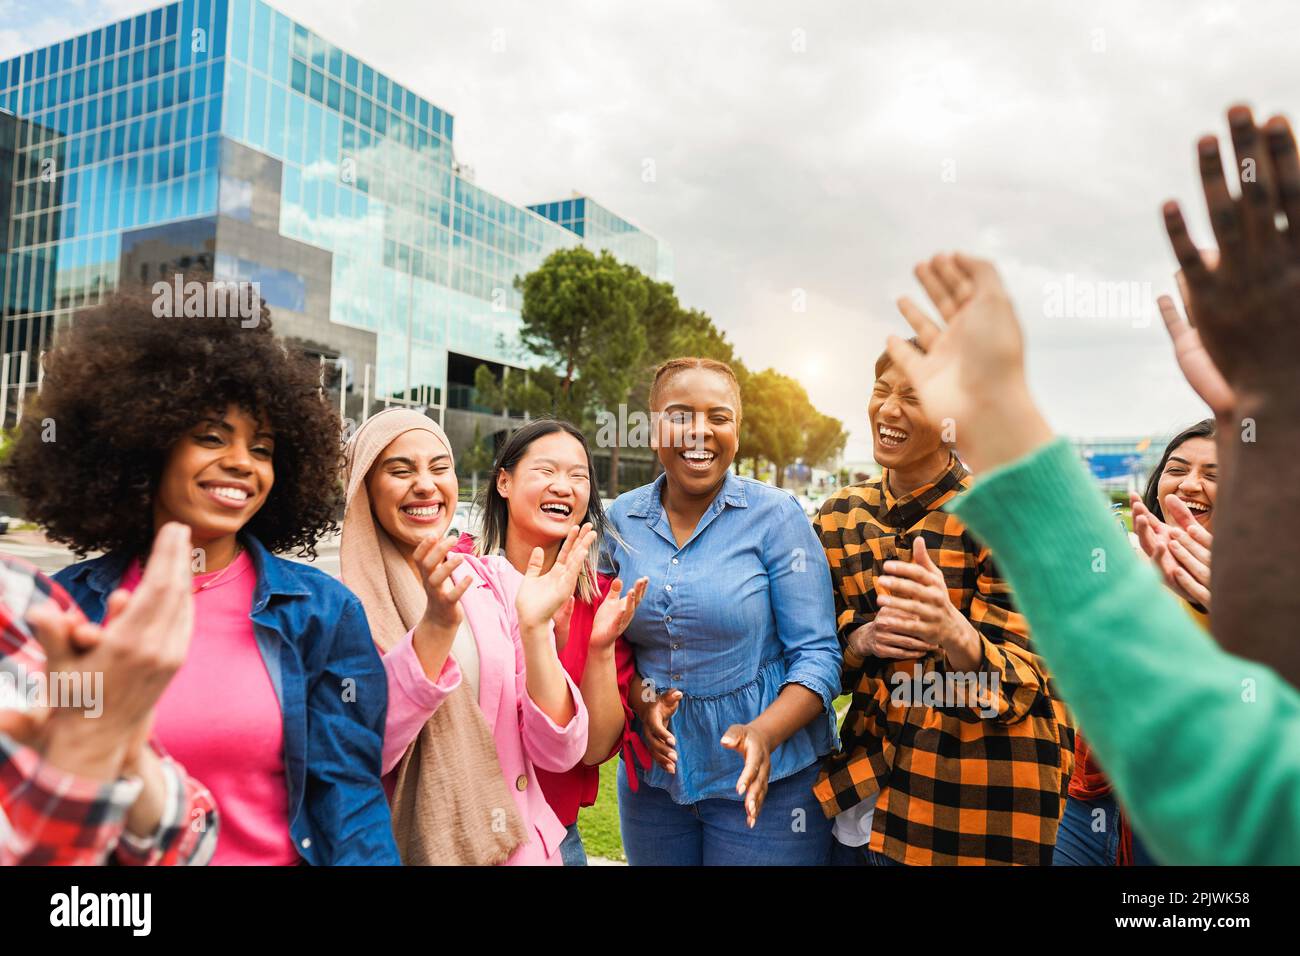 Young diverse people celebrating together outdoor - Focus on curvy african girl face Stock Photo